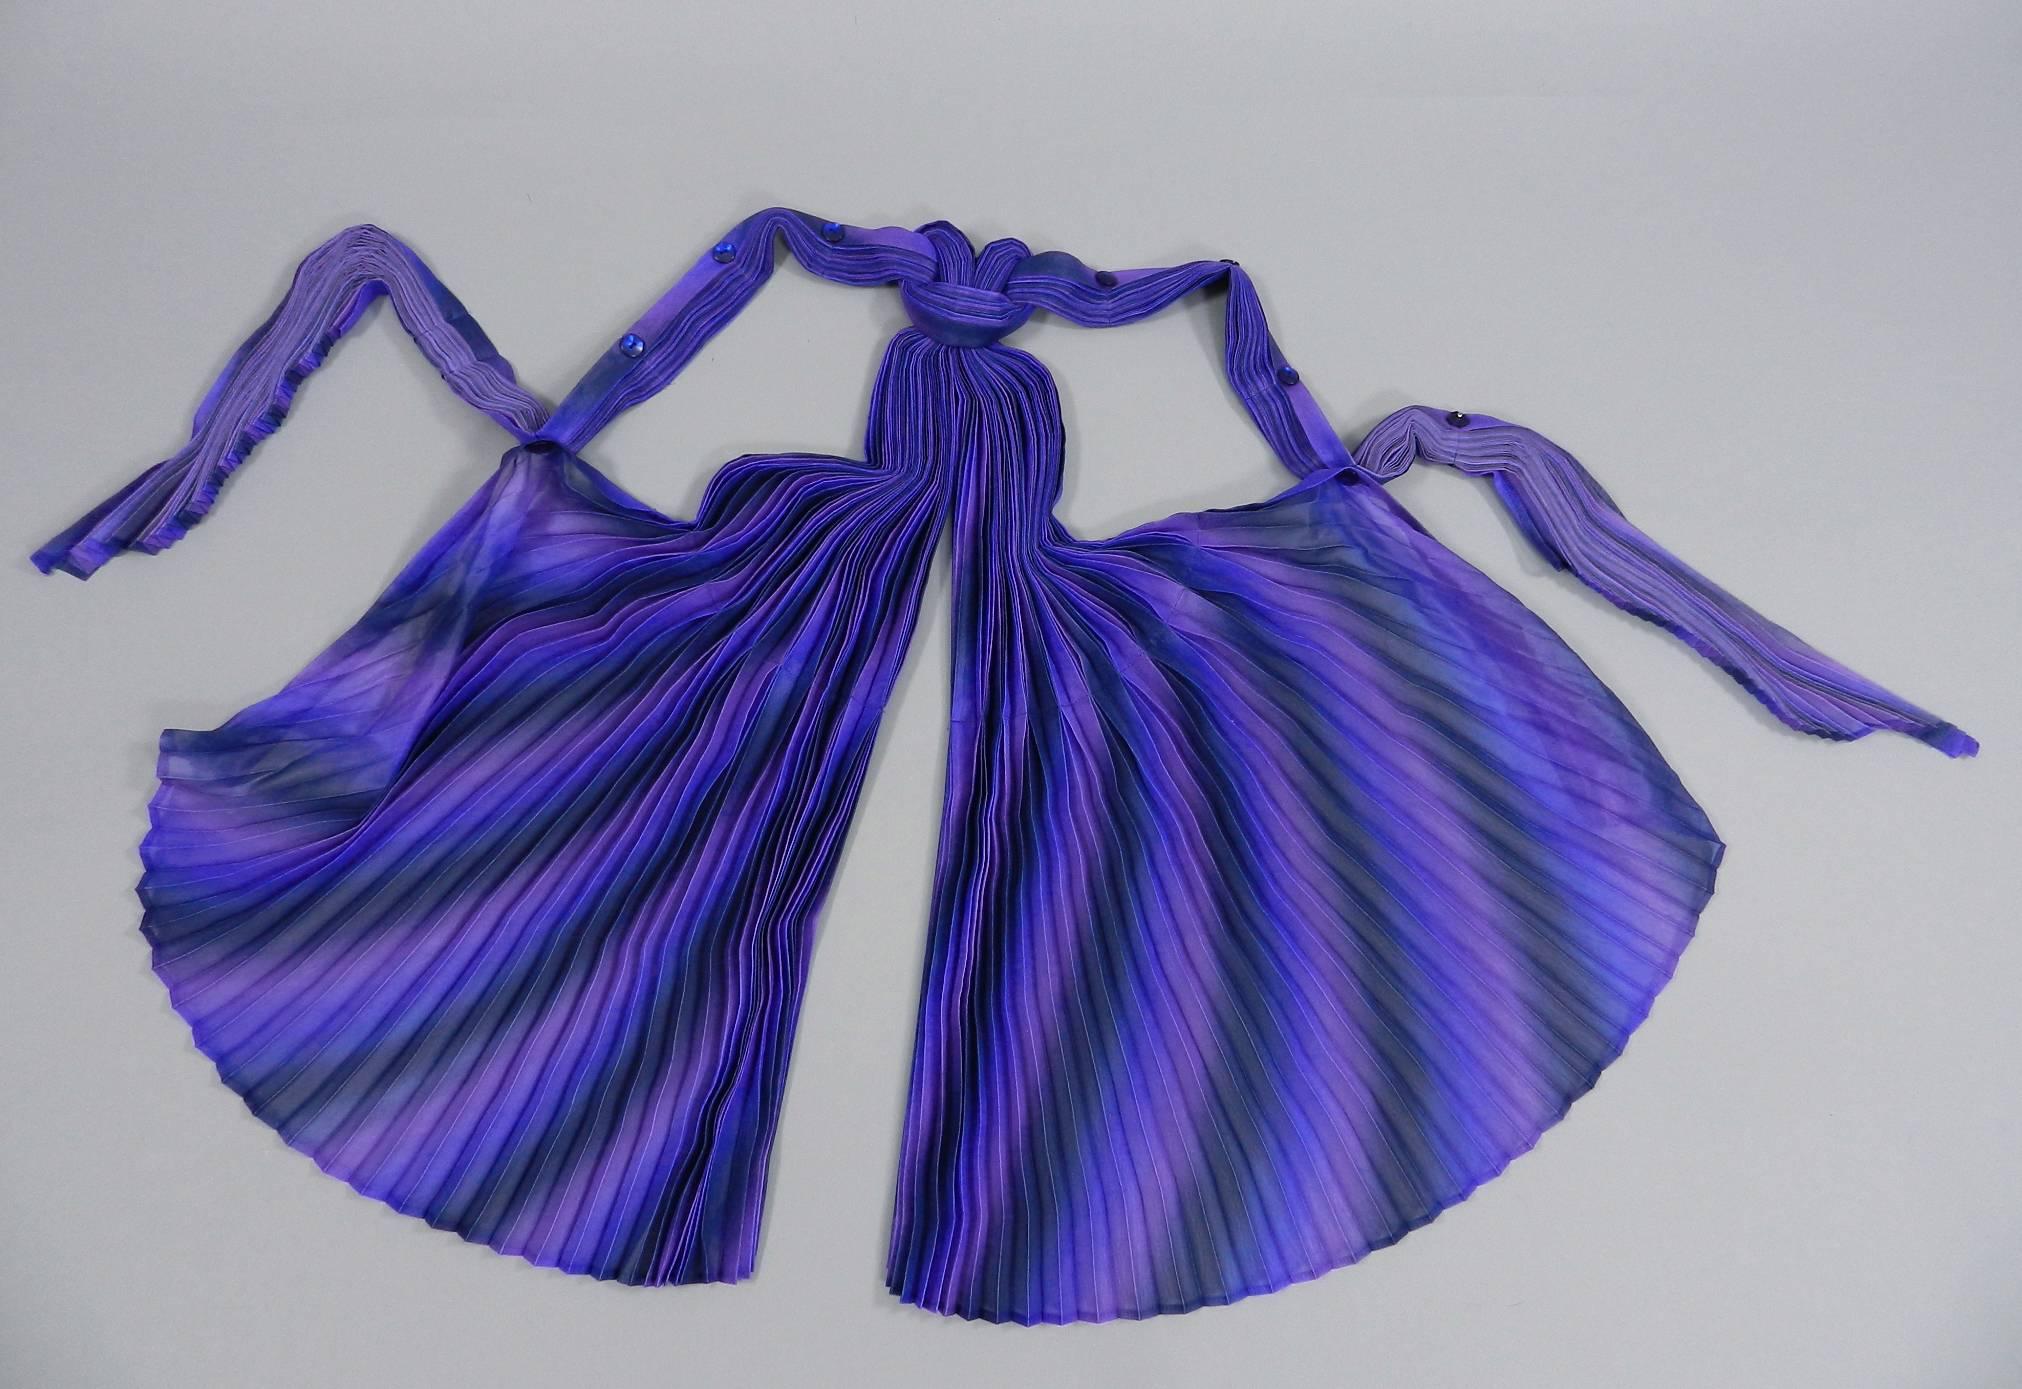 Issey Miyake Fete purple sheer pleated top. Can be configured several ways including the halter top pictured. Great design and construction. Excellent pre-owned condition - worn once. Tagged Miyake size 2 (would fit overall size S / M - about USA 4